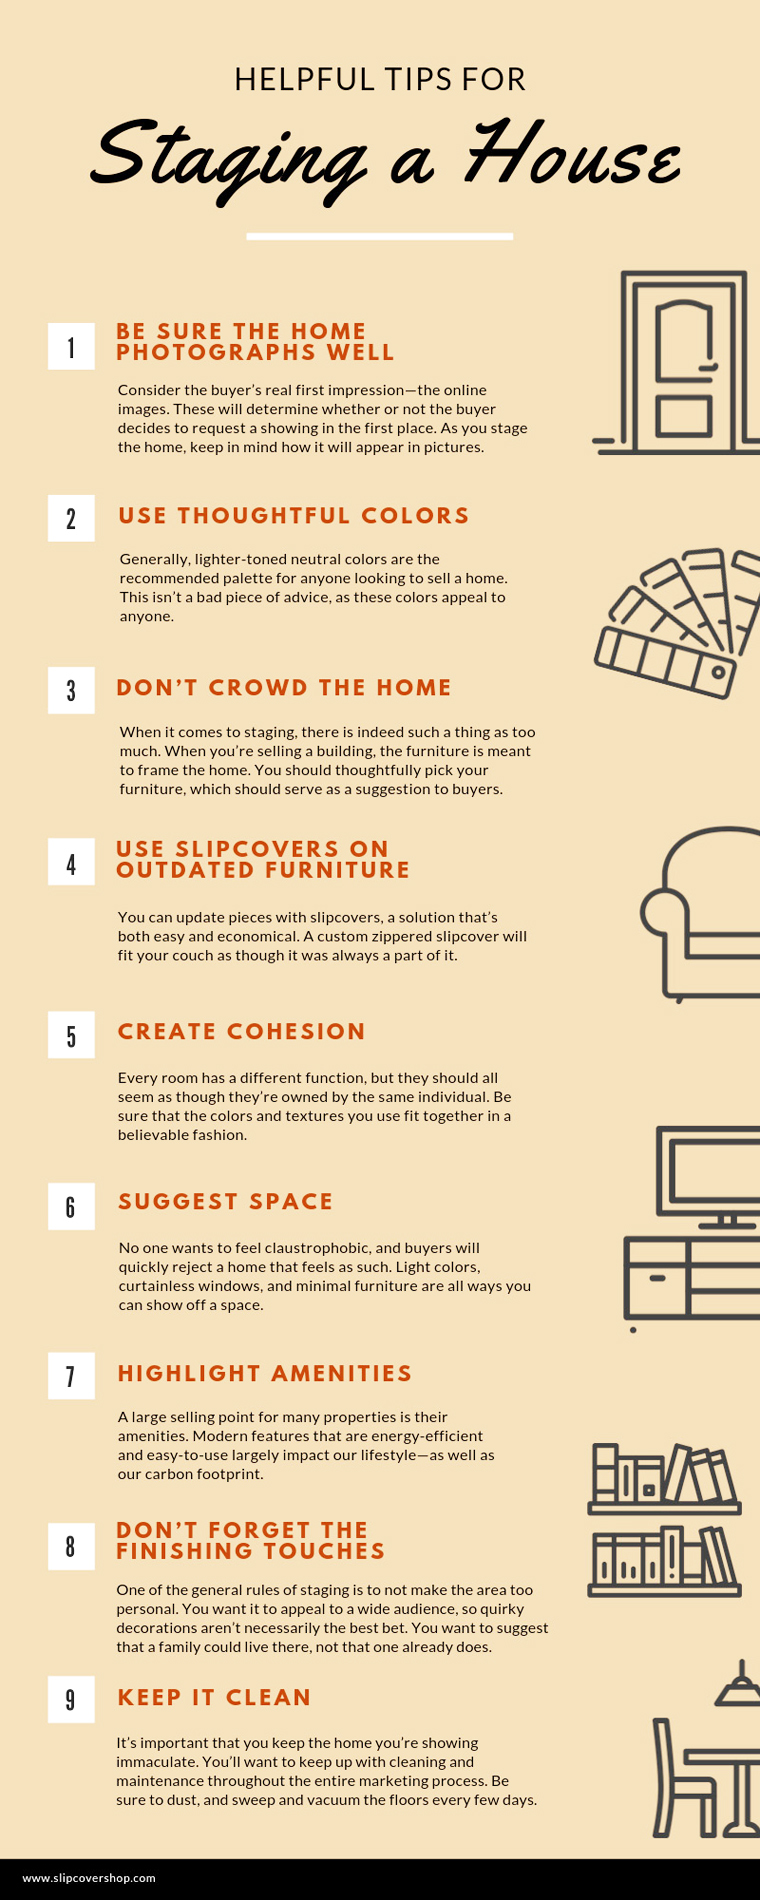 Helpful Tips for Staging a House infographic